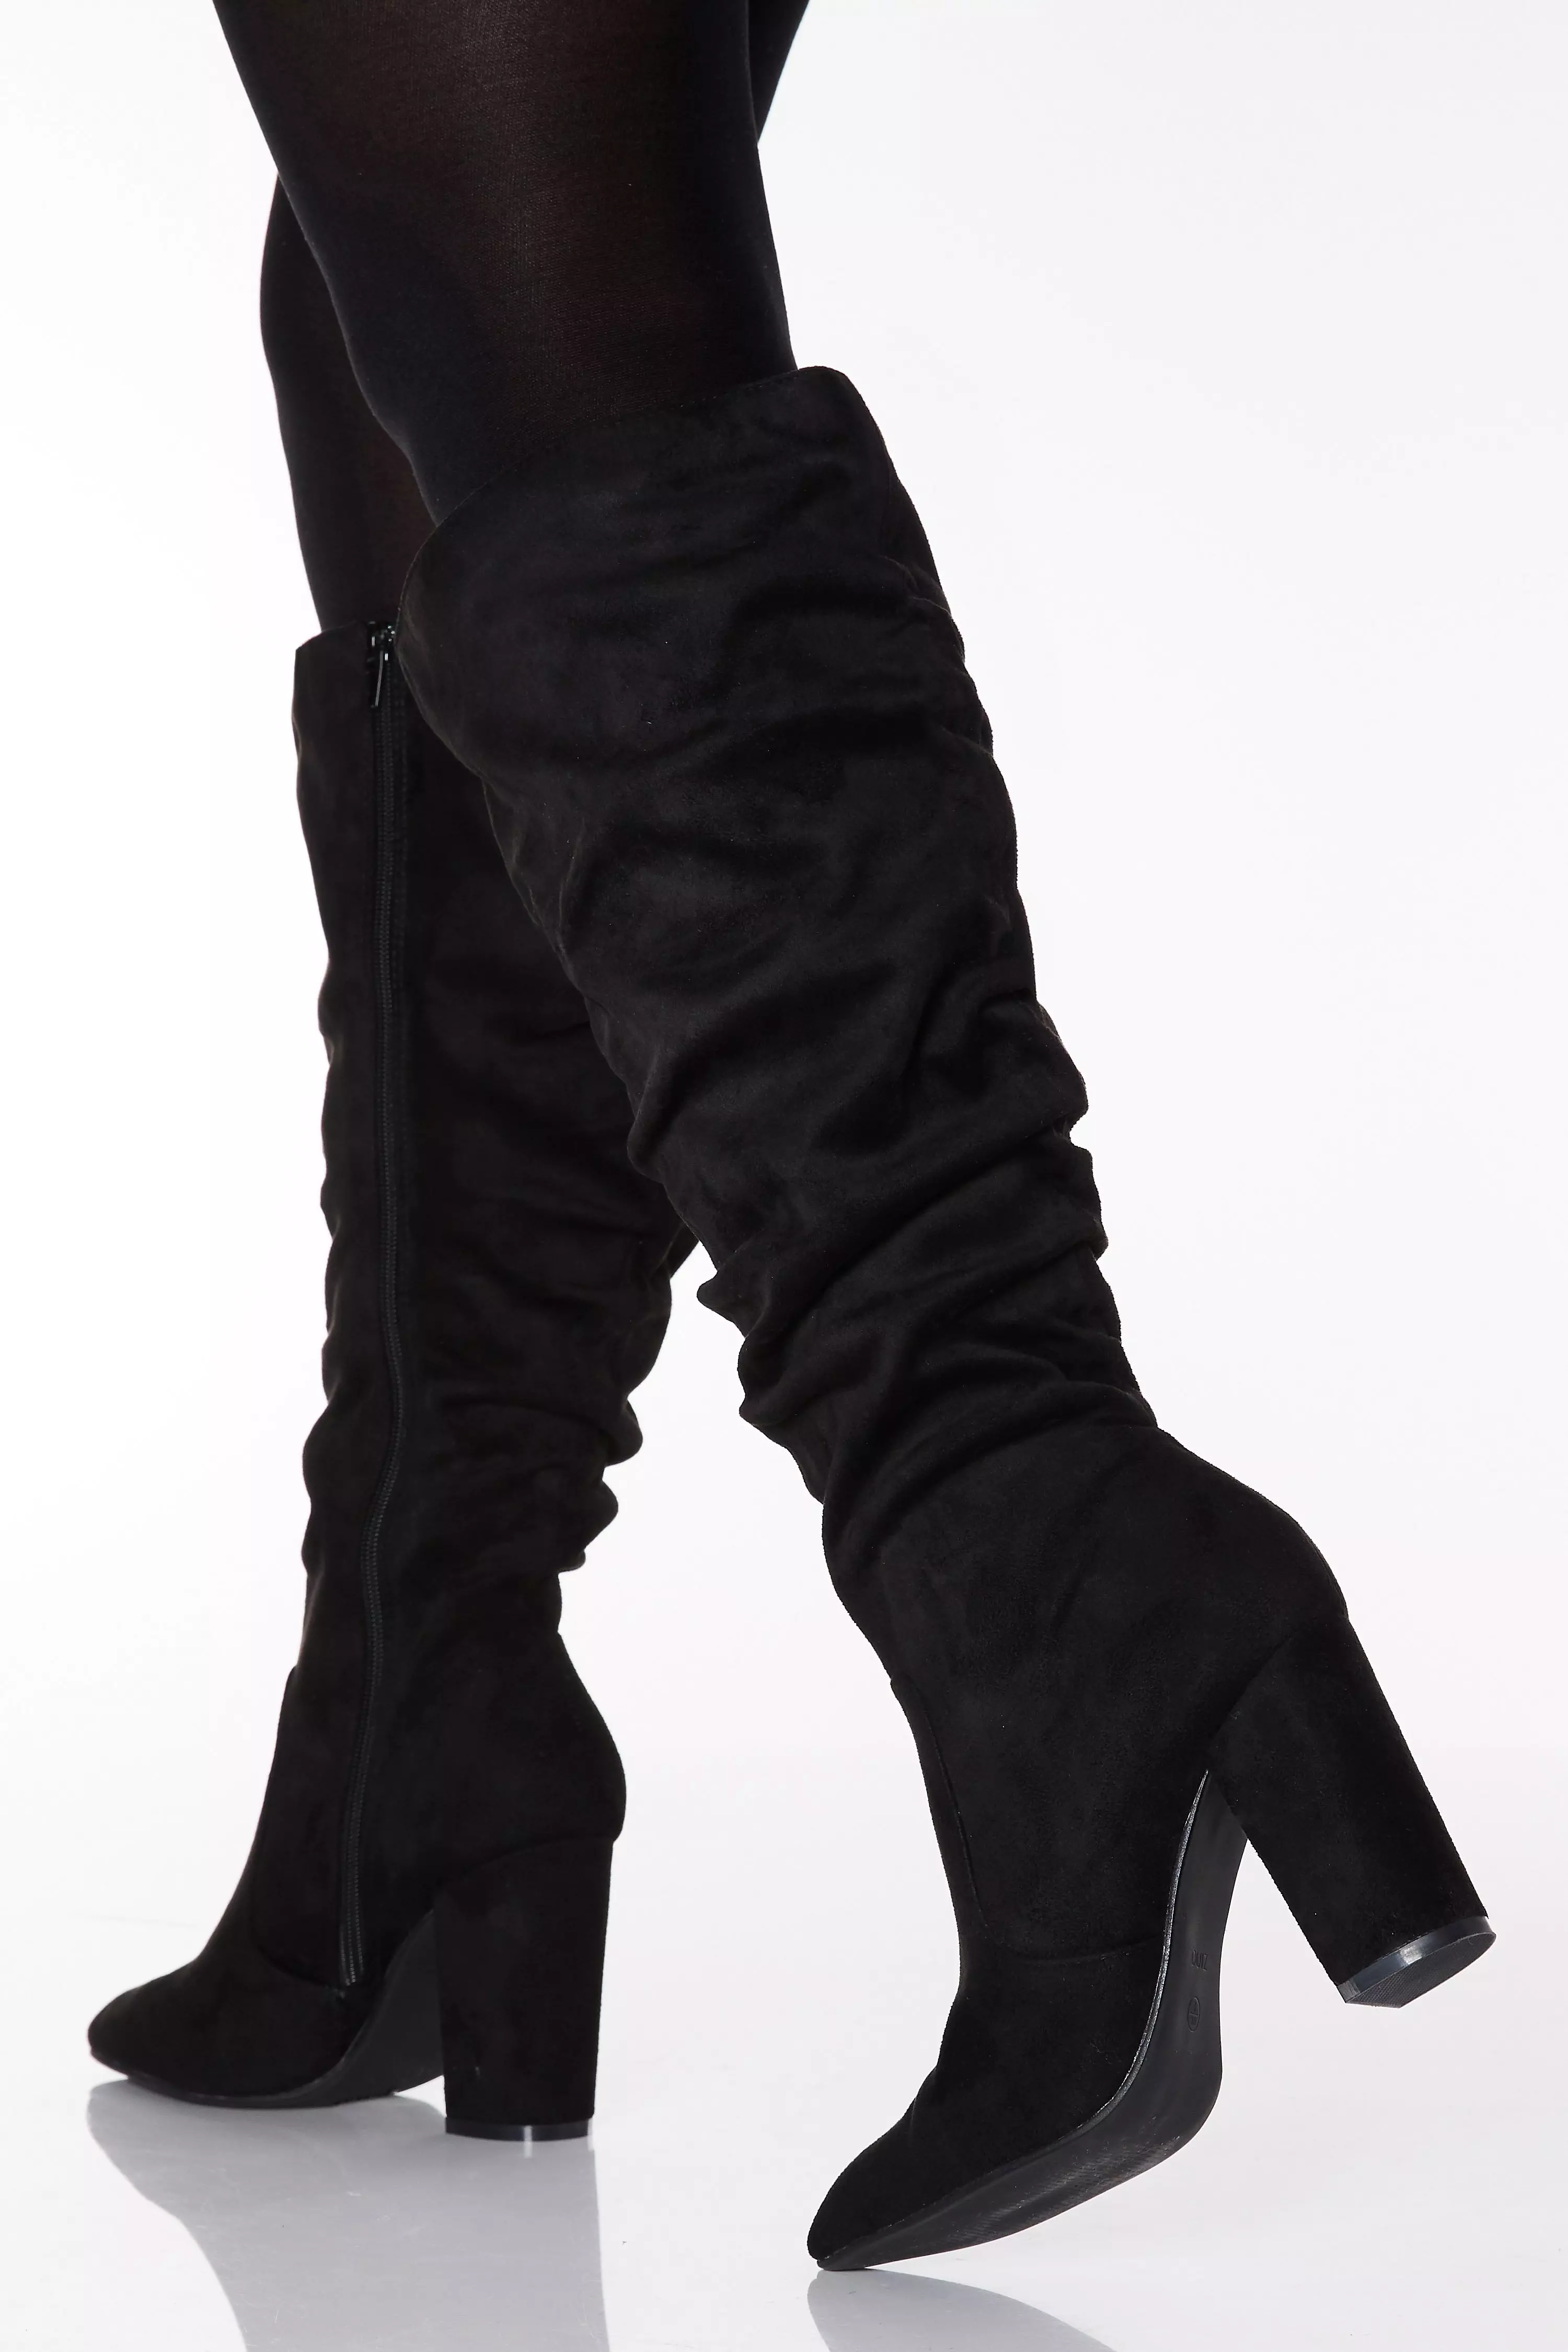 black suede ruched boots